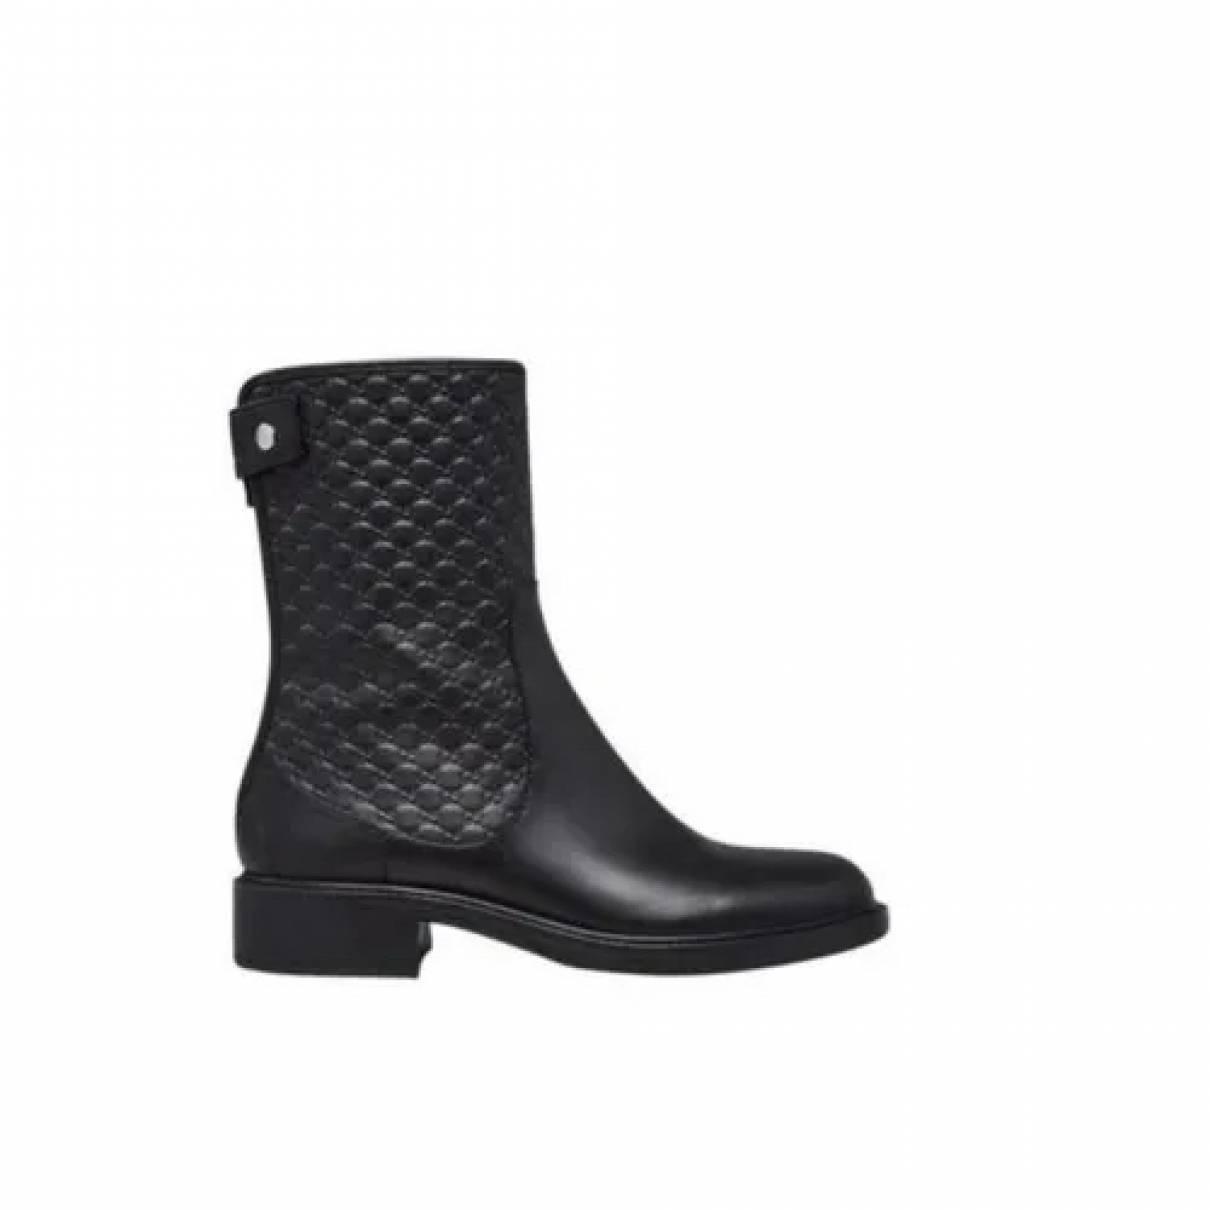 Leather biker boots - 5